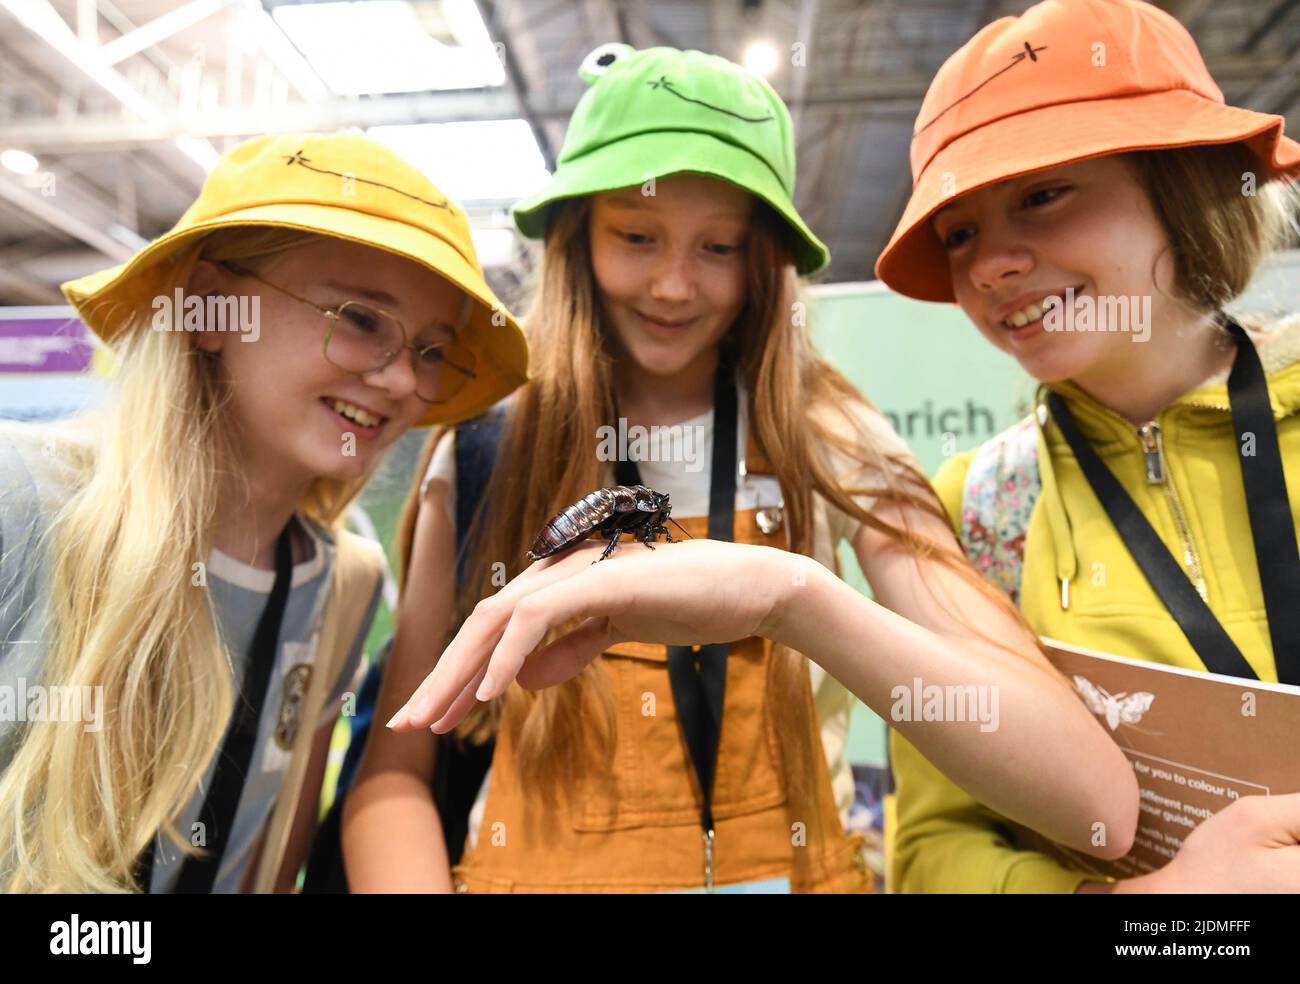 EDITORIAL USE ONLY Emily Bowman, aged 14, Kate McGovern, aged 13 and Alexia Coker, aged 13 take part in the Big Bang Fair 2022 at the NEC in Birmingham. Picture date: Wednesday June 22, 2022. Stock Photo